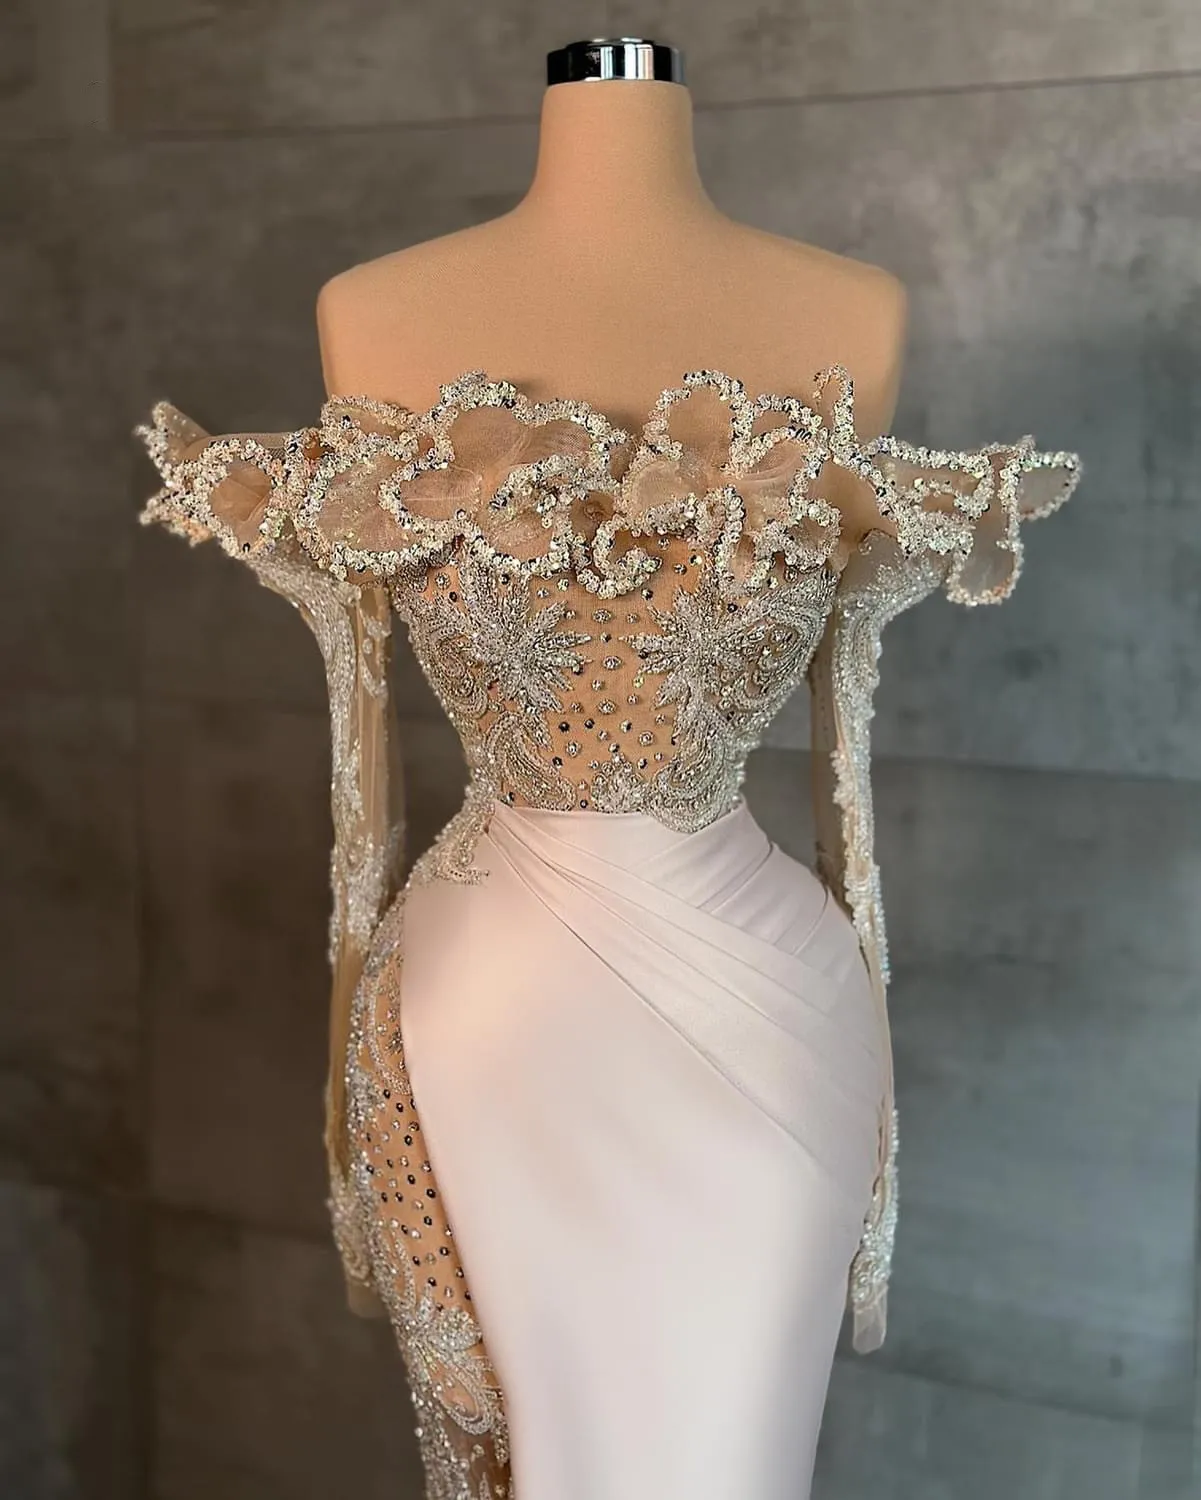 2023 May Aso Ebi Beaded Crystals Prom Dress Mermaid Satin Luxurious Evening Formal Party Second Reception Birthday Engagement Gowns Dress Robe De Soiree ZJ320